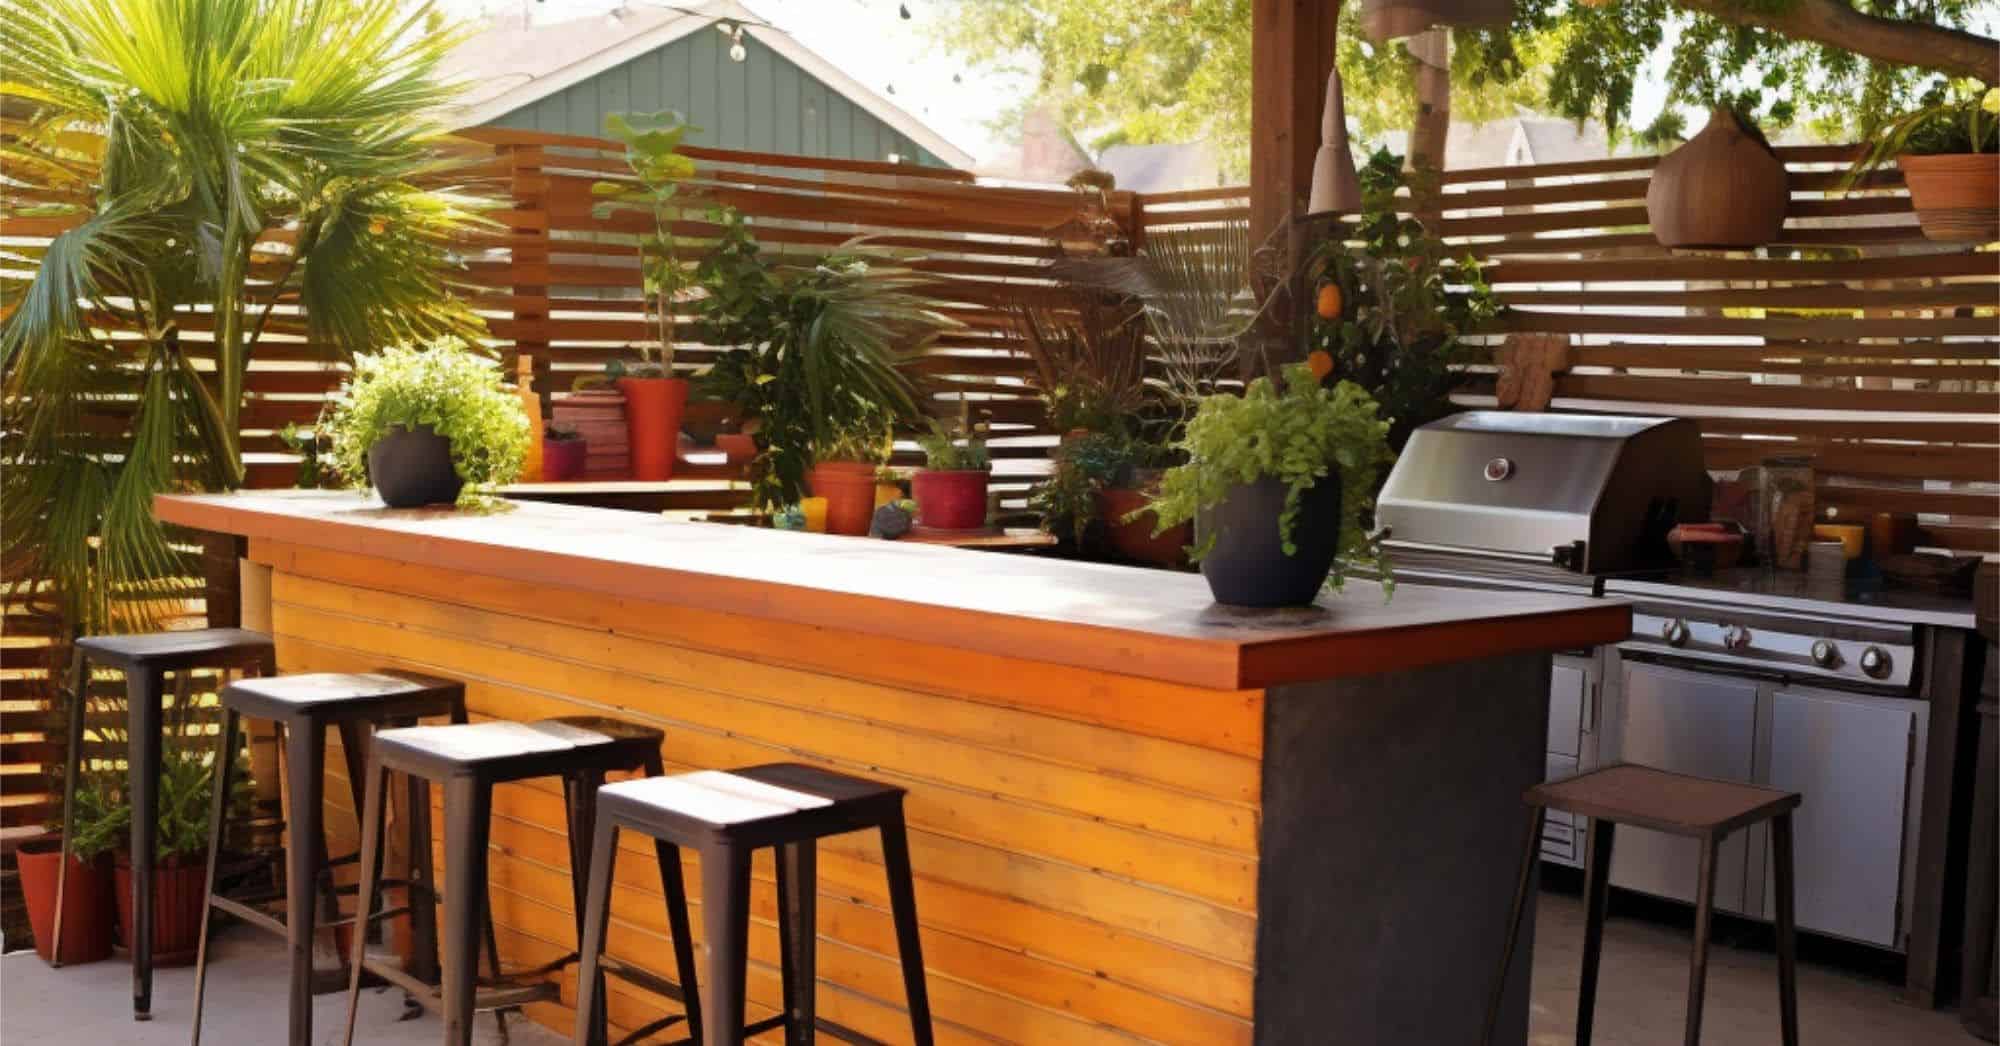 Wooden patio bar with stools outdoors